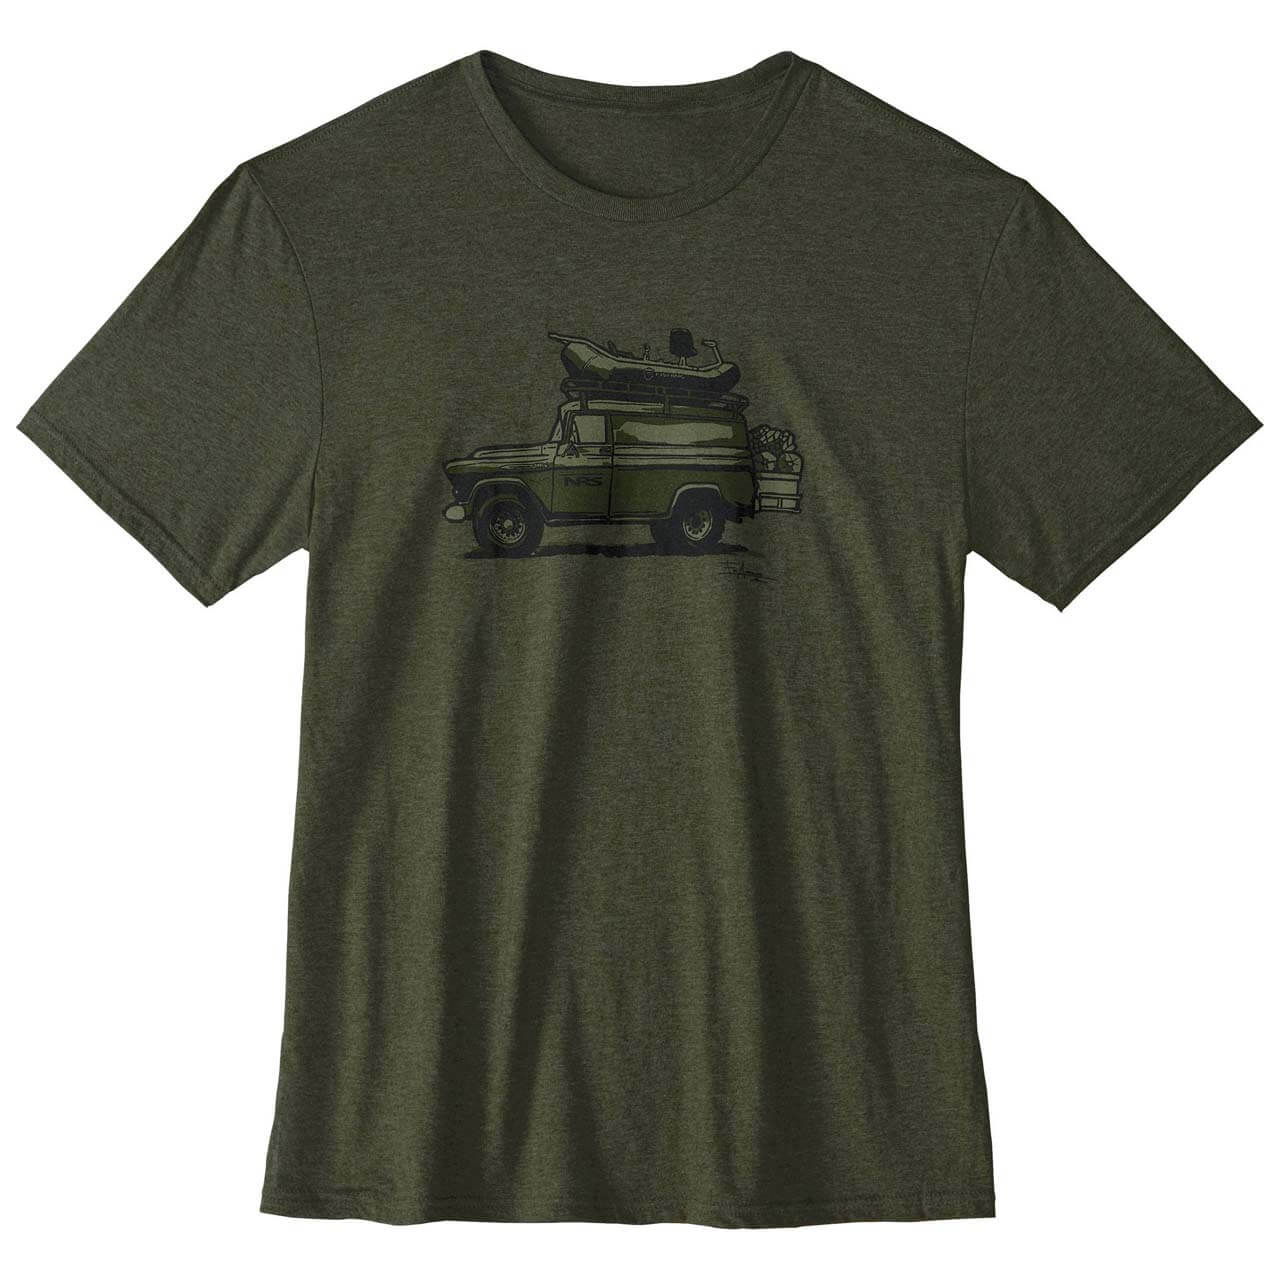 NRS Rigged Out T-Shirt - Heathered Olive, S von NRS}